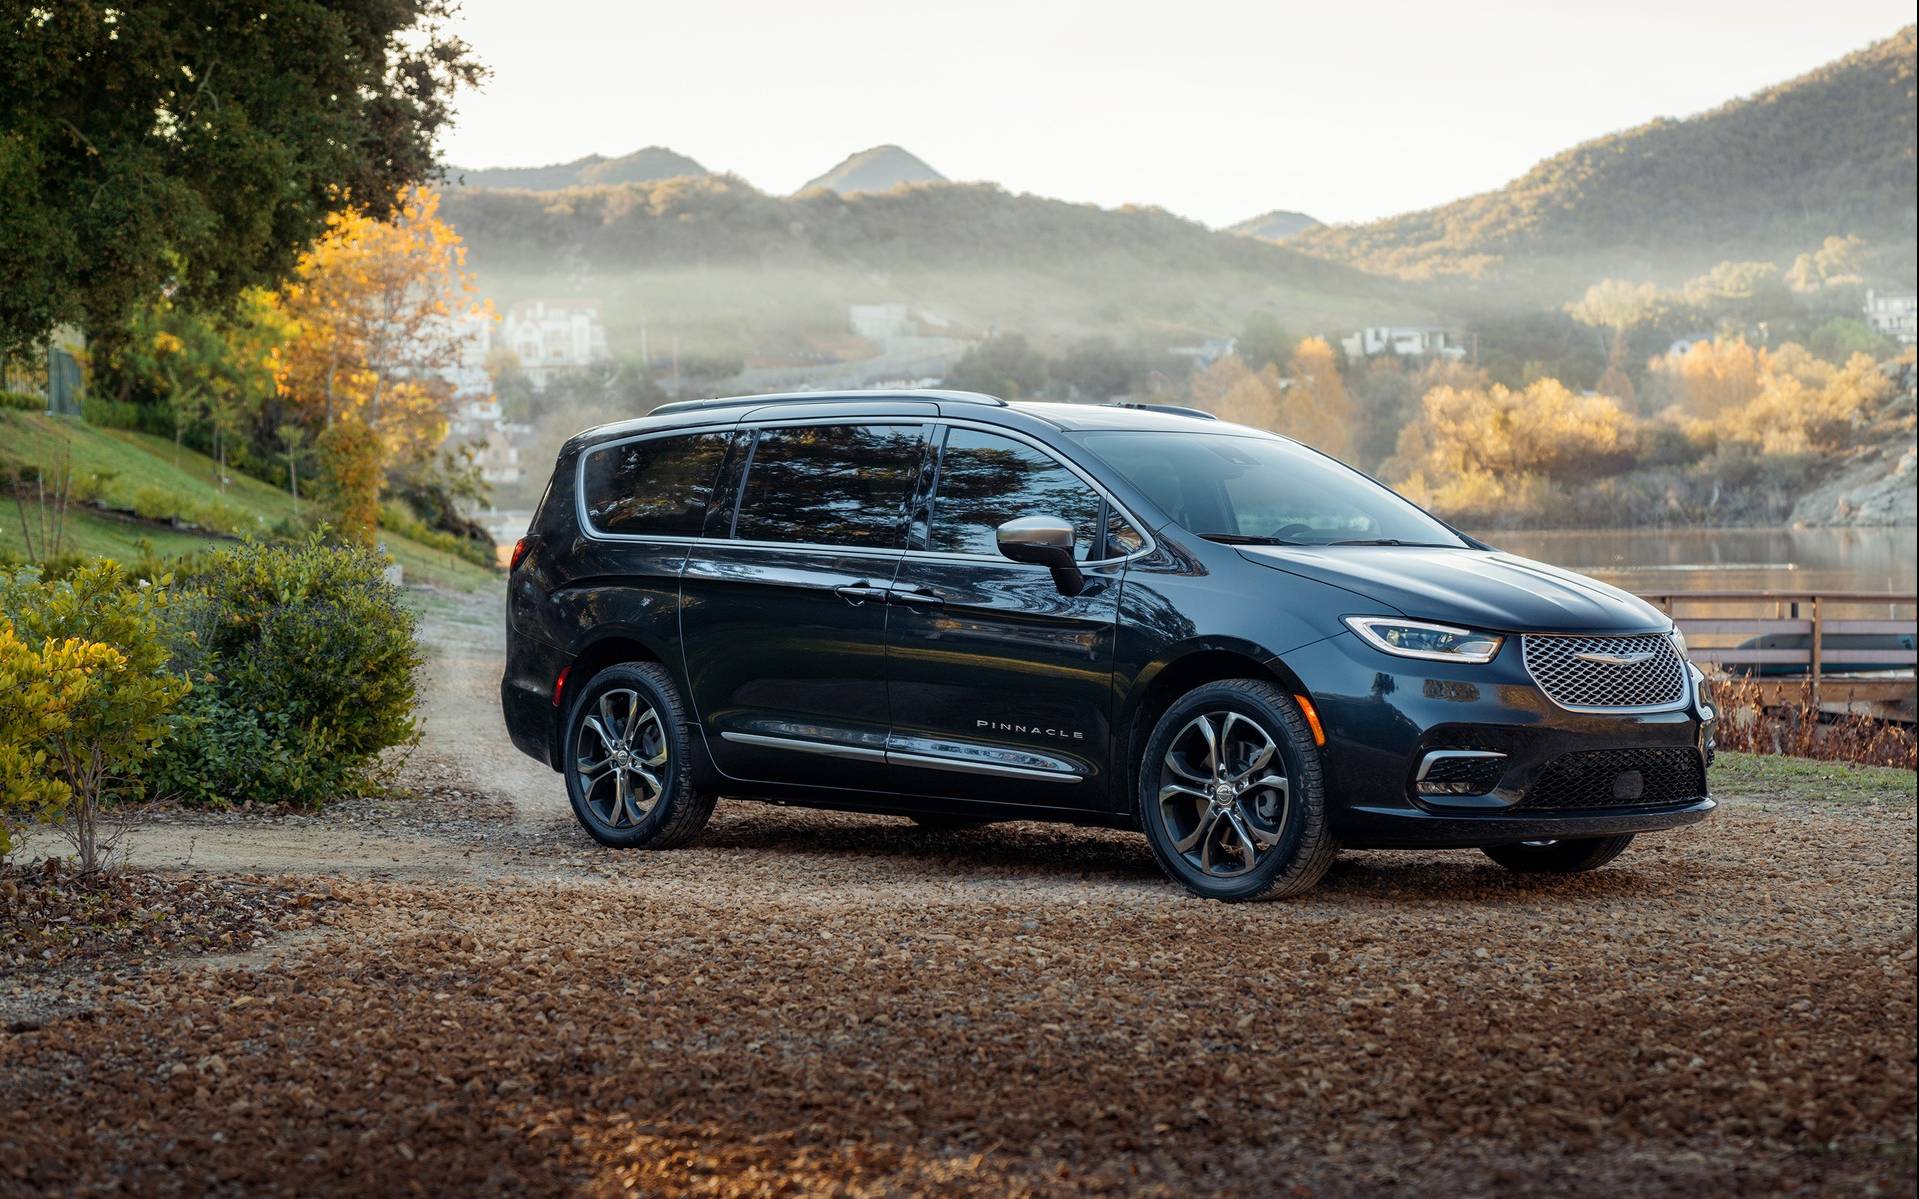 5 Favorite Features of the 2021 Chrysler Pacifica